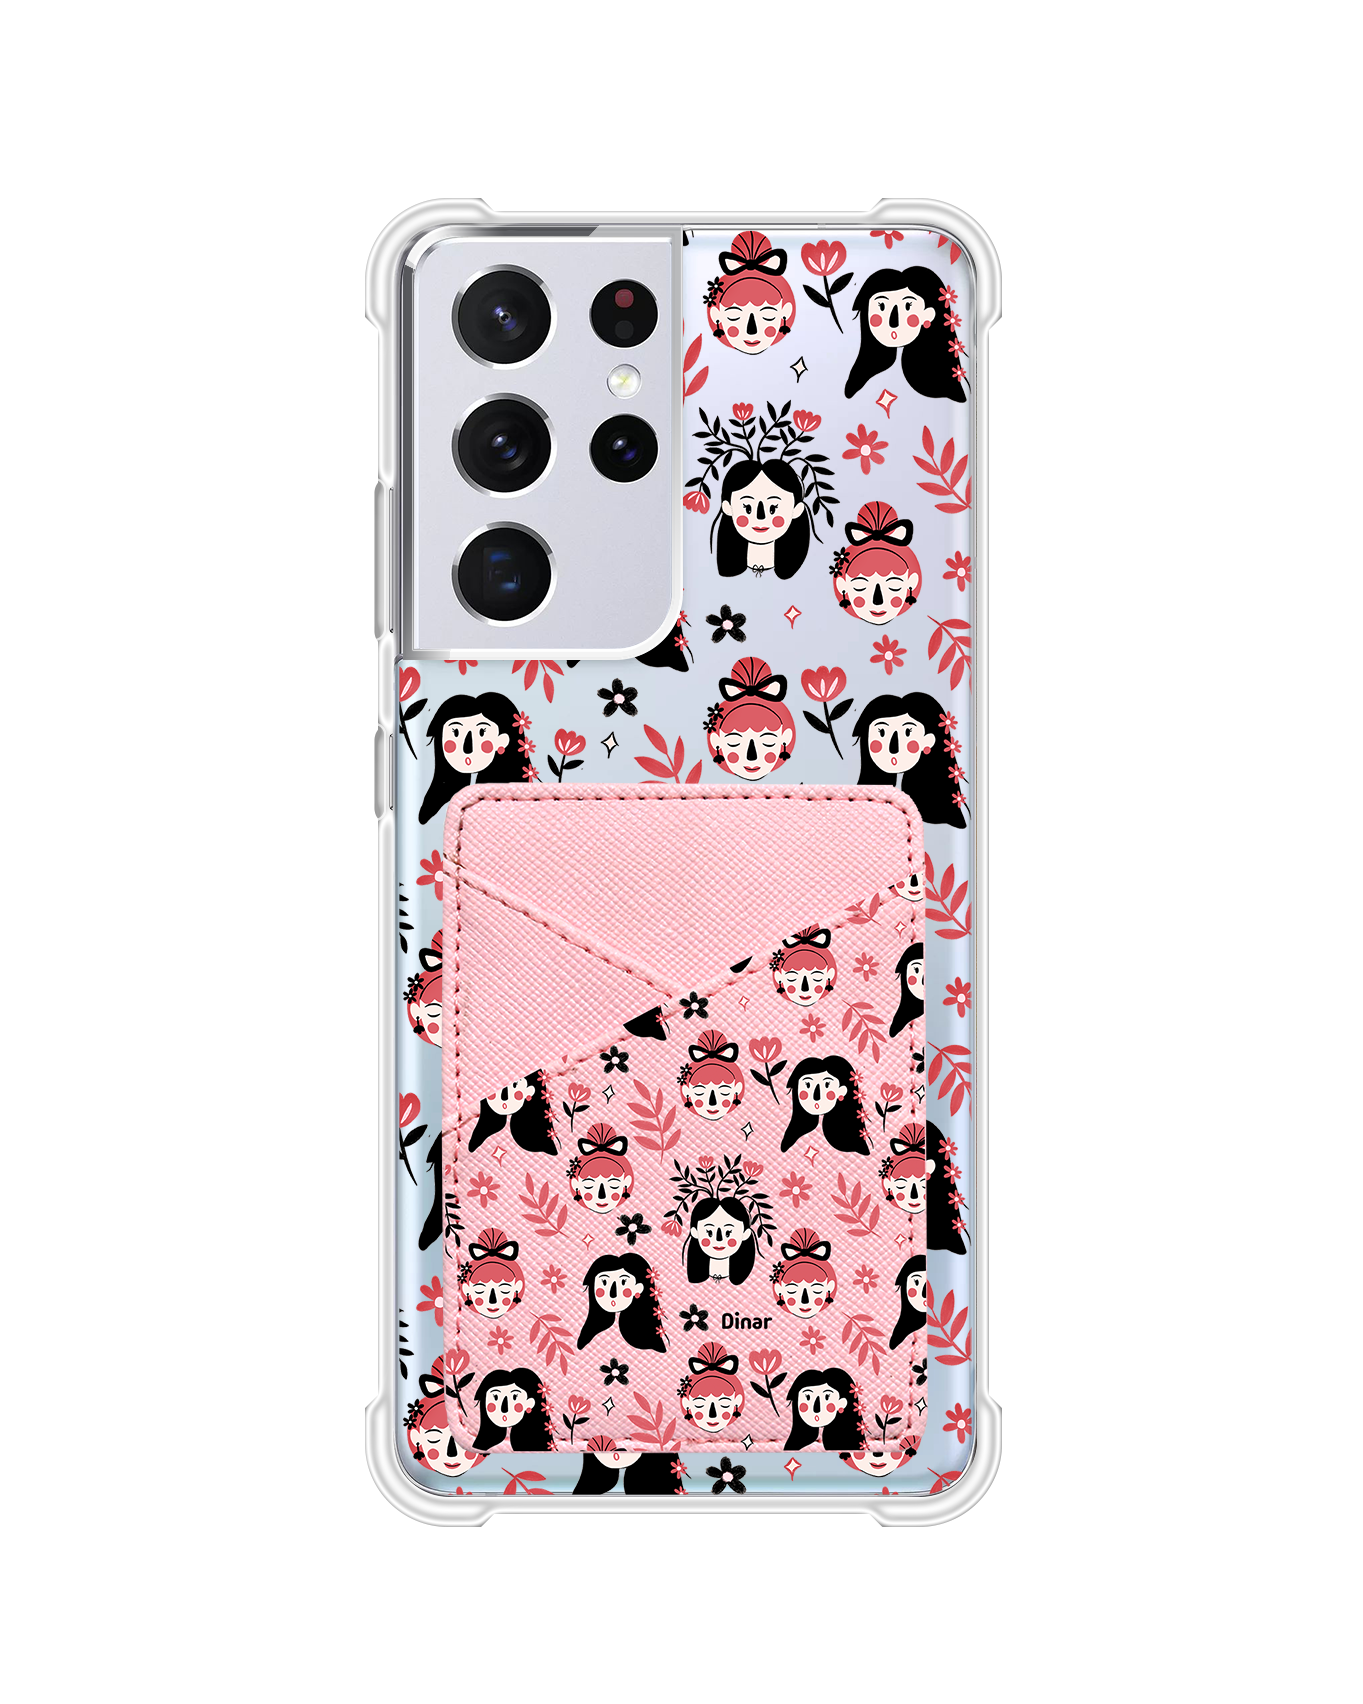 Android Phone Wallet Case - Flowery Faces